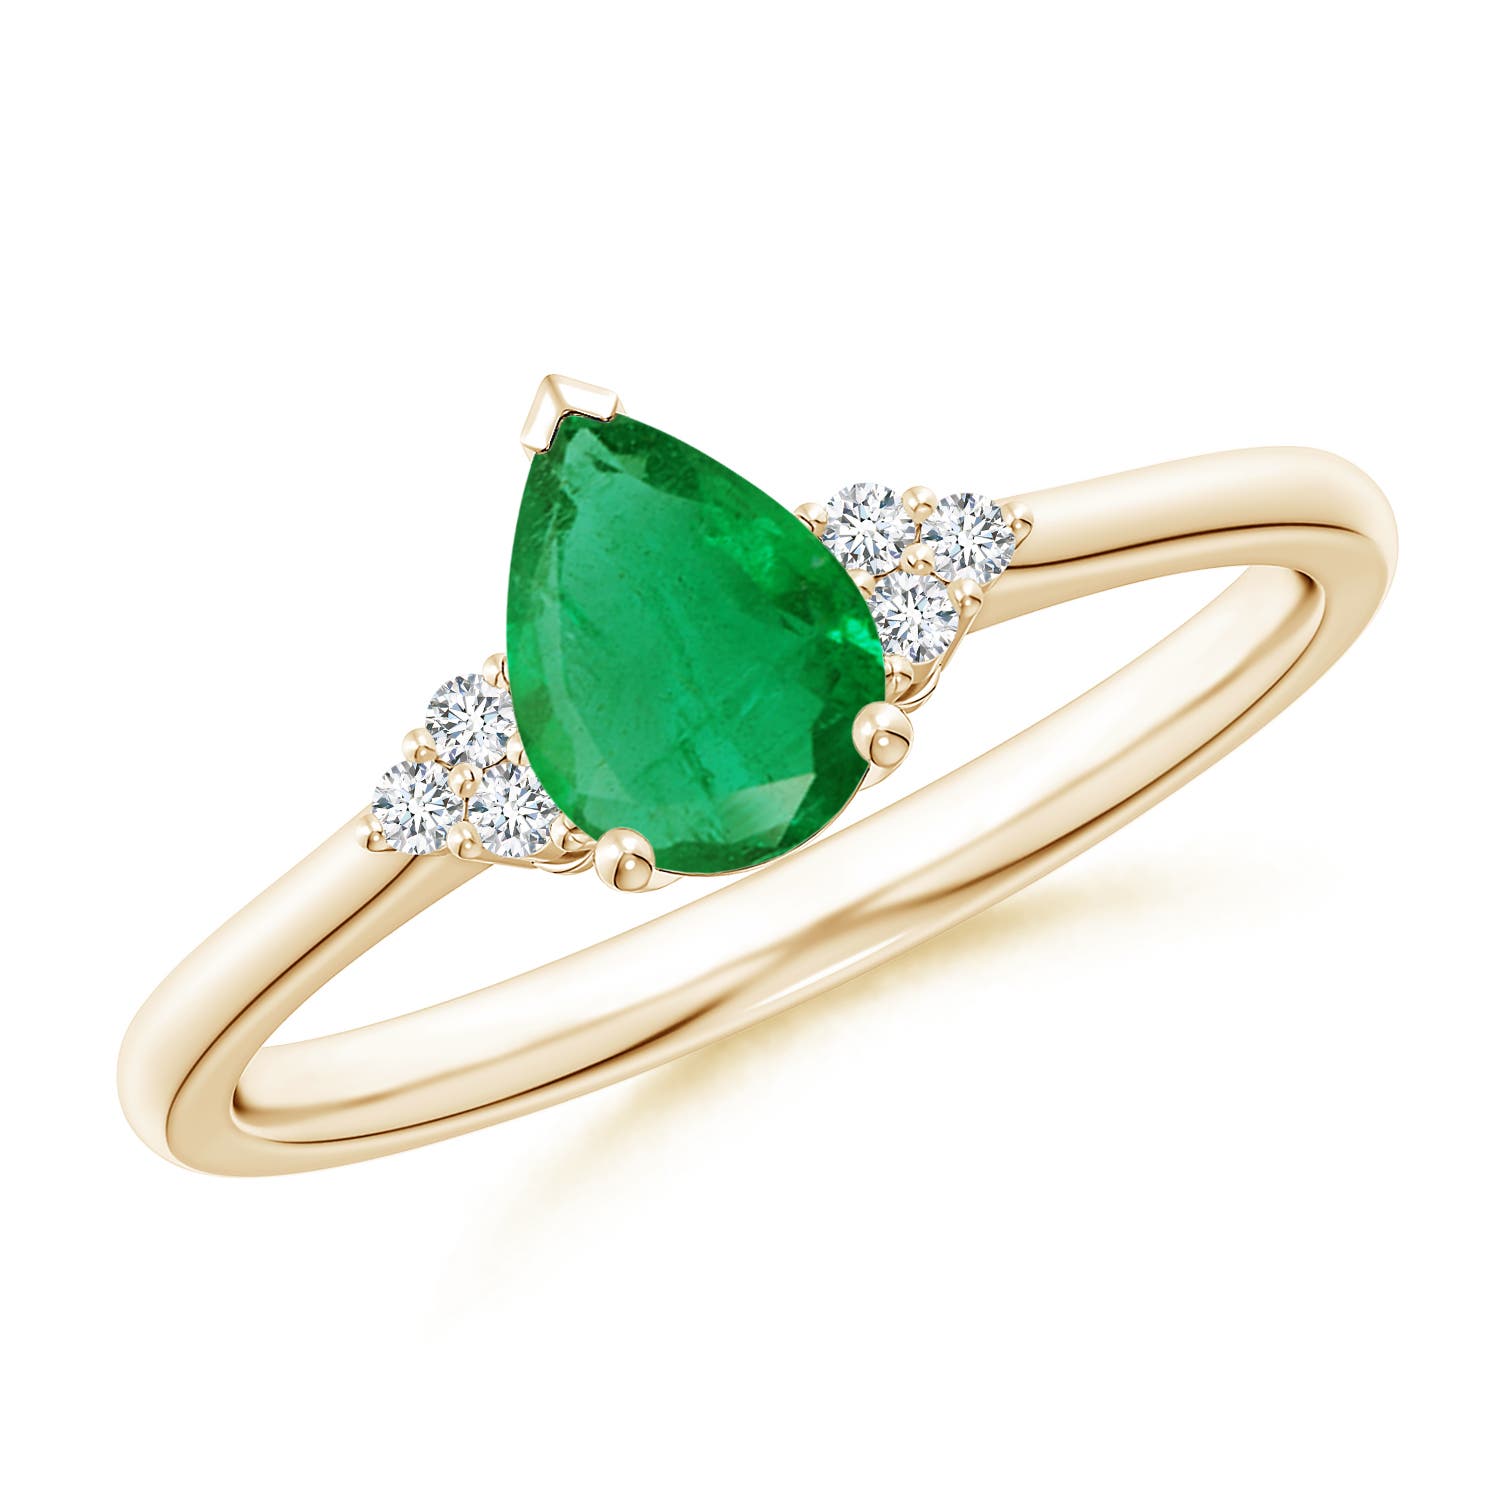 AA - Emerald / 0.66 CT / 14 KT Yellow Gold